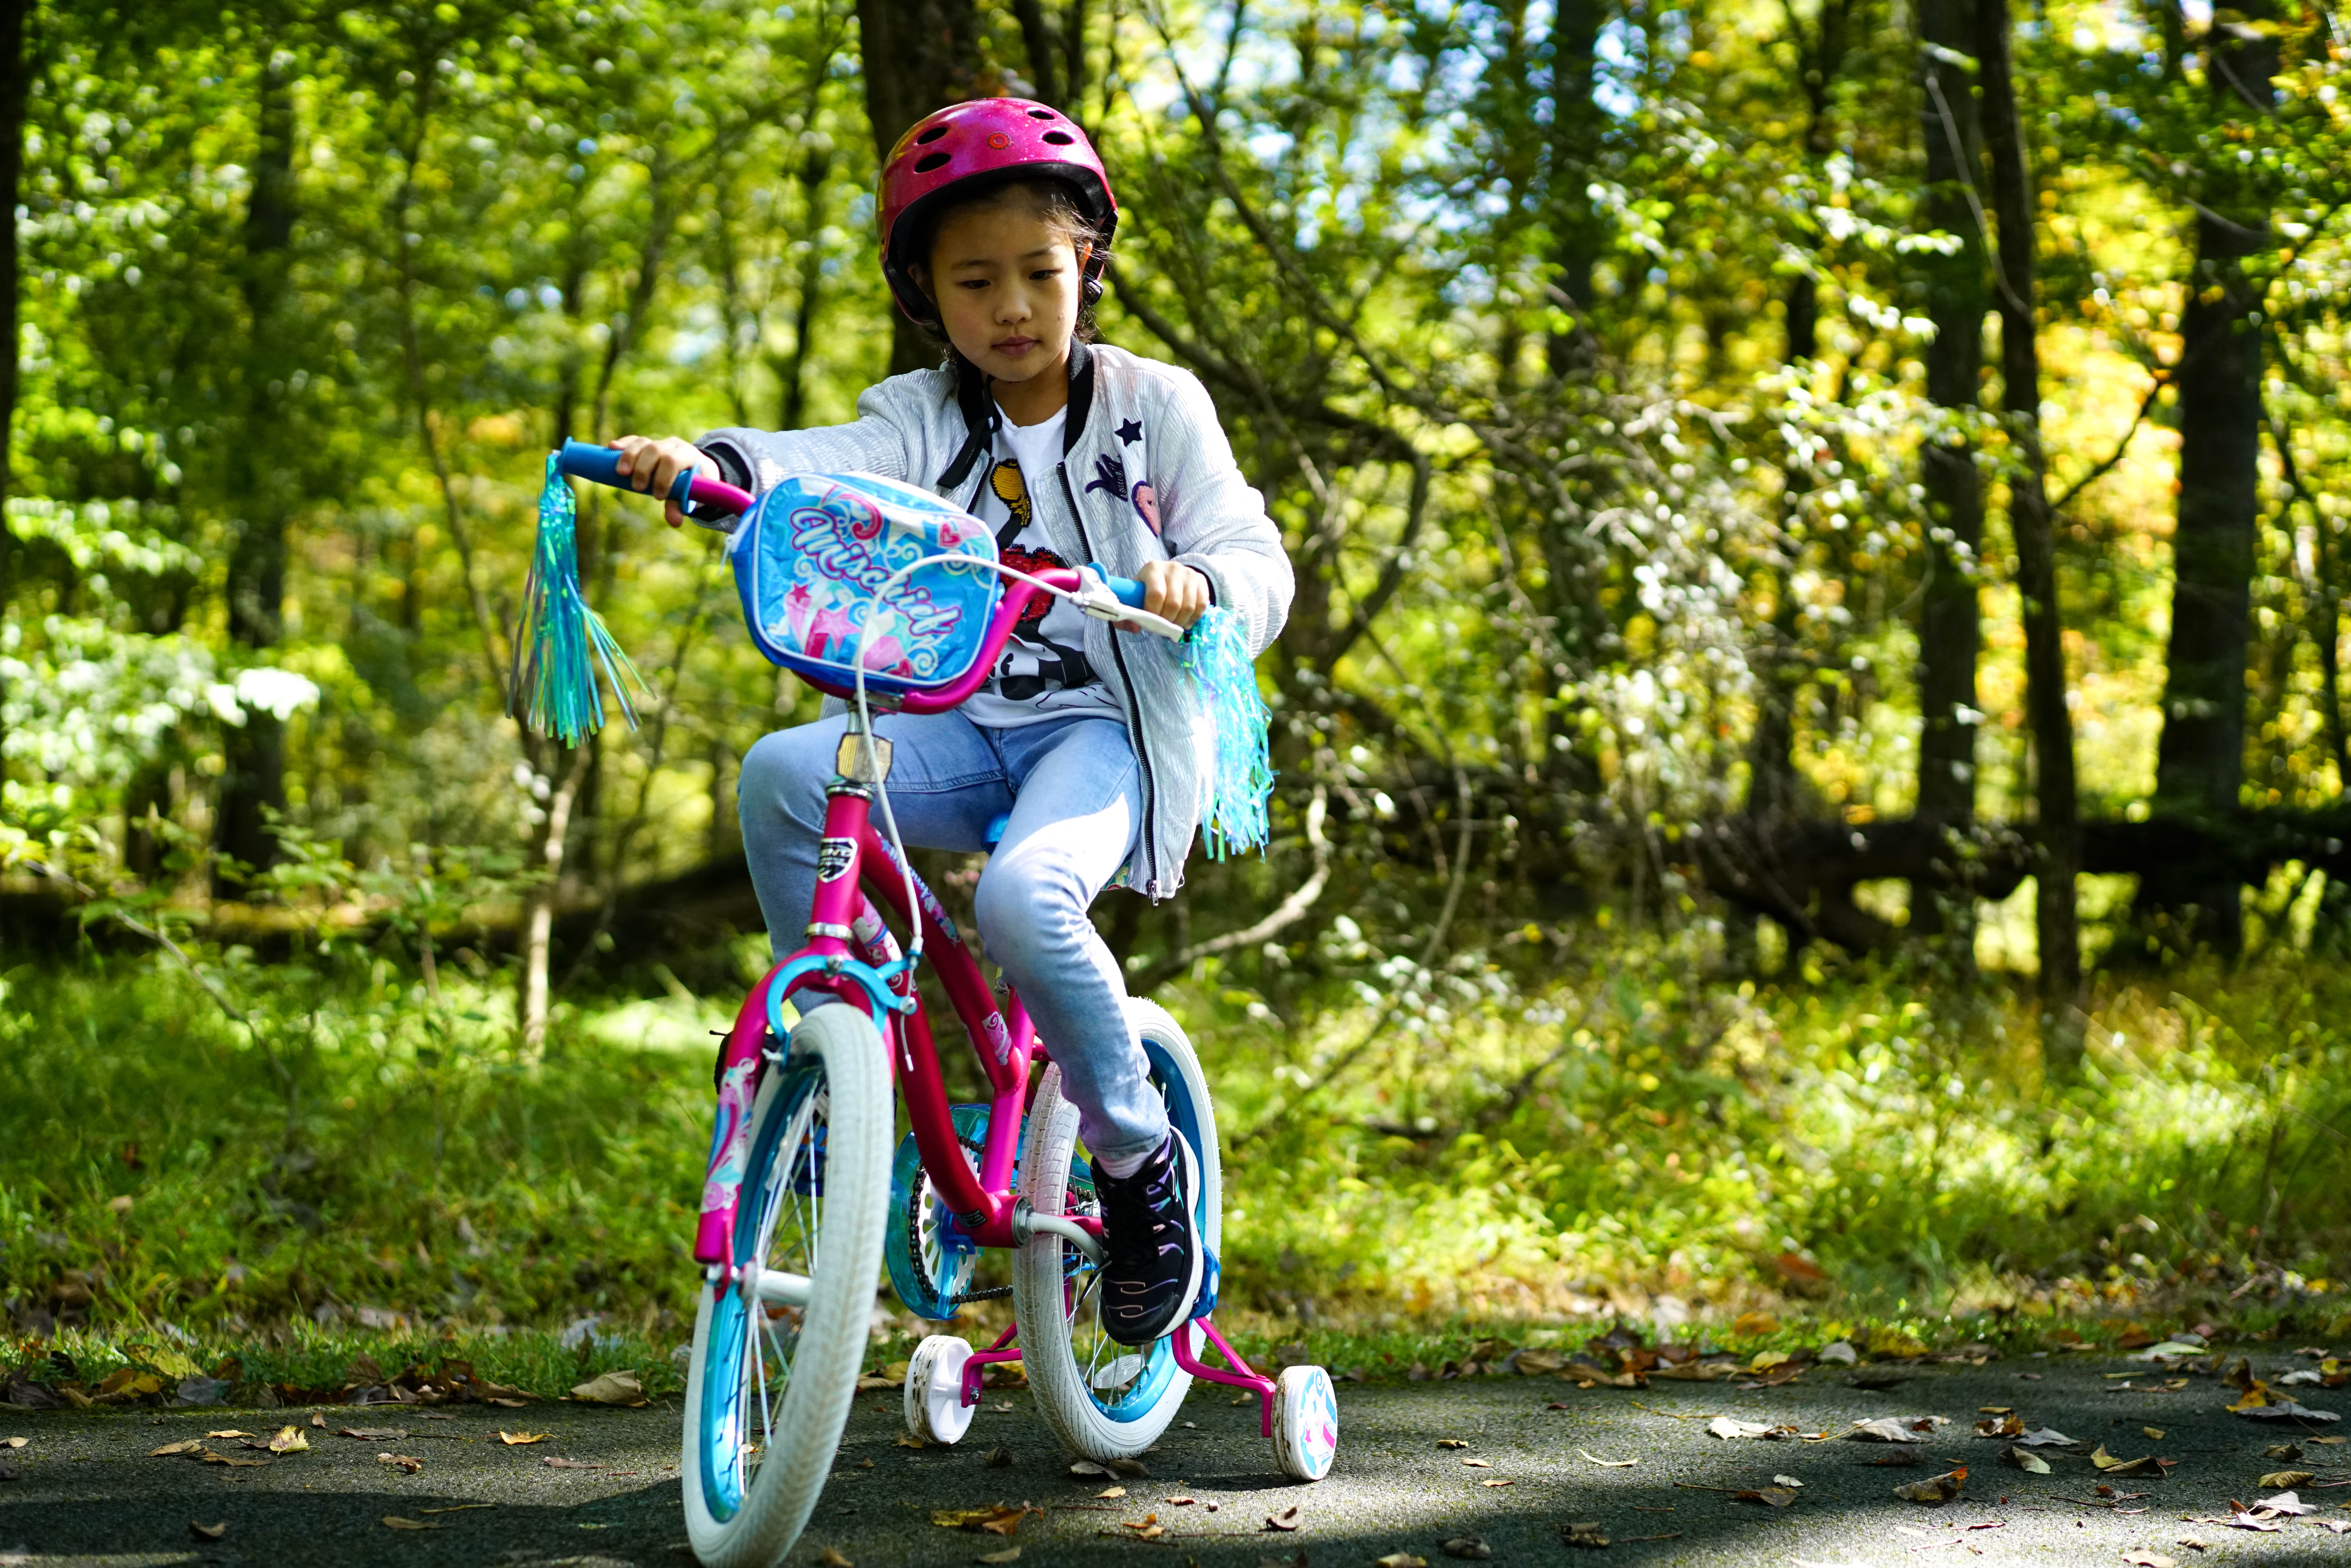 Kent 18 in. Mischief Girl's Child Bike, Pink and Blue - image 4 of 11